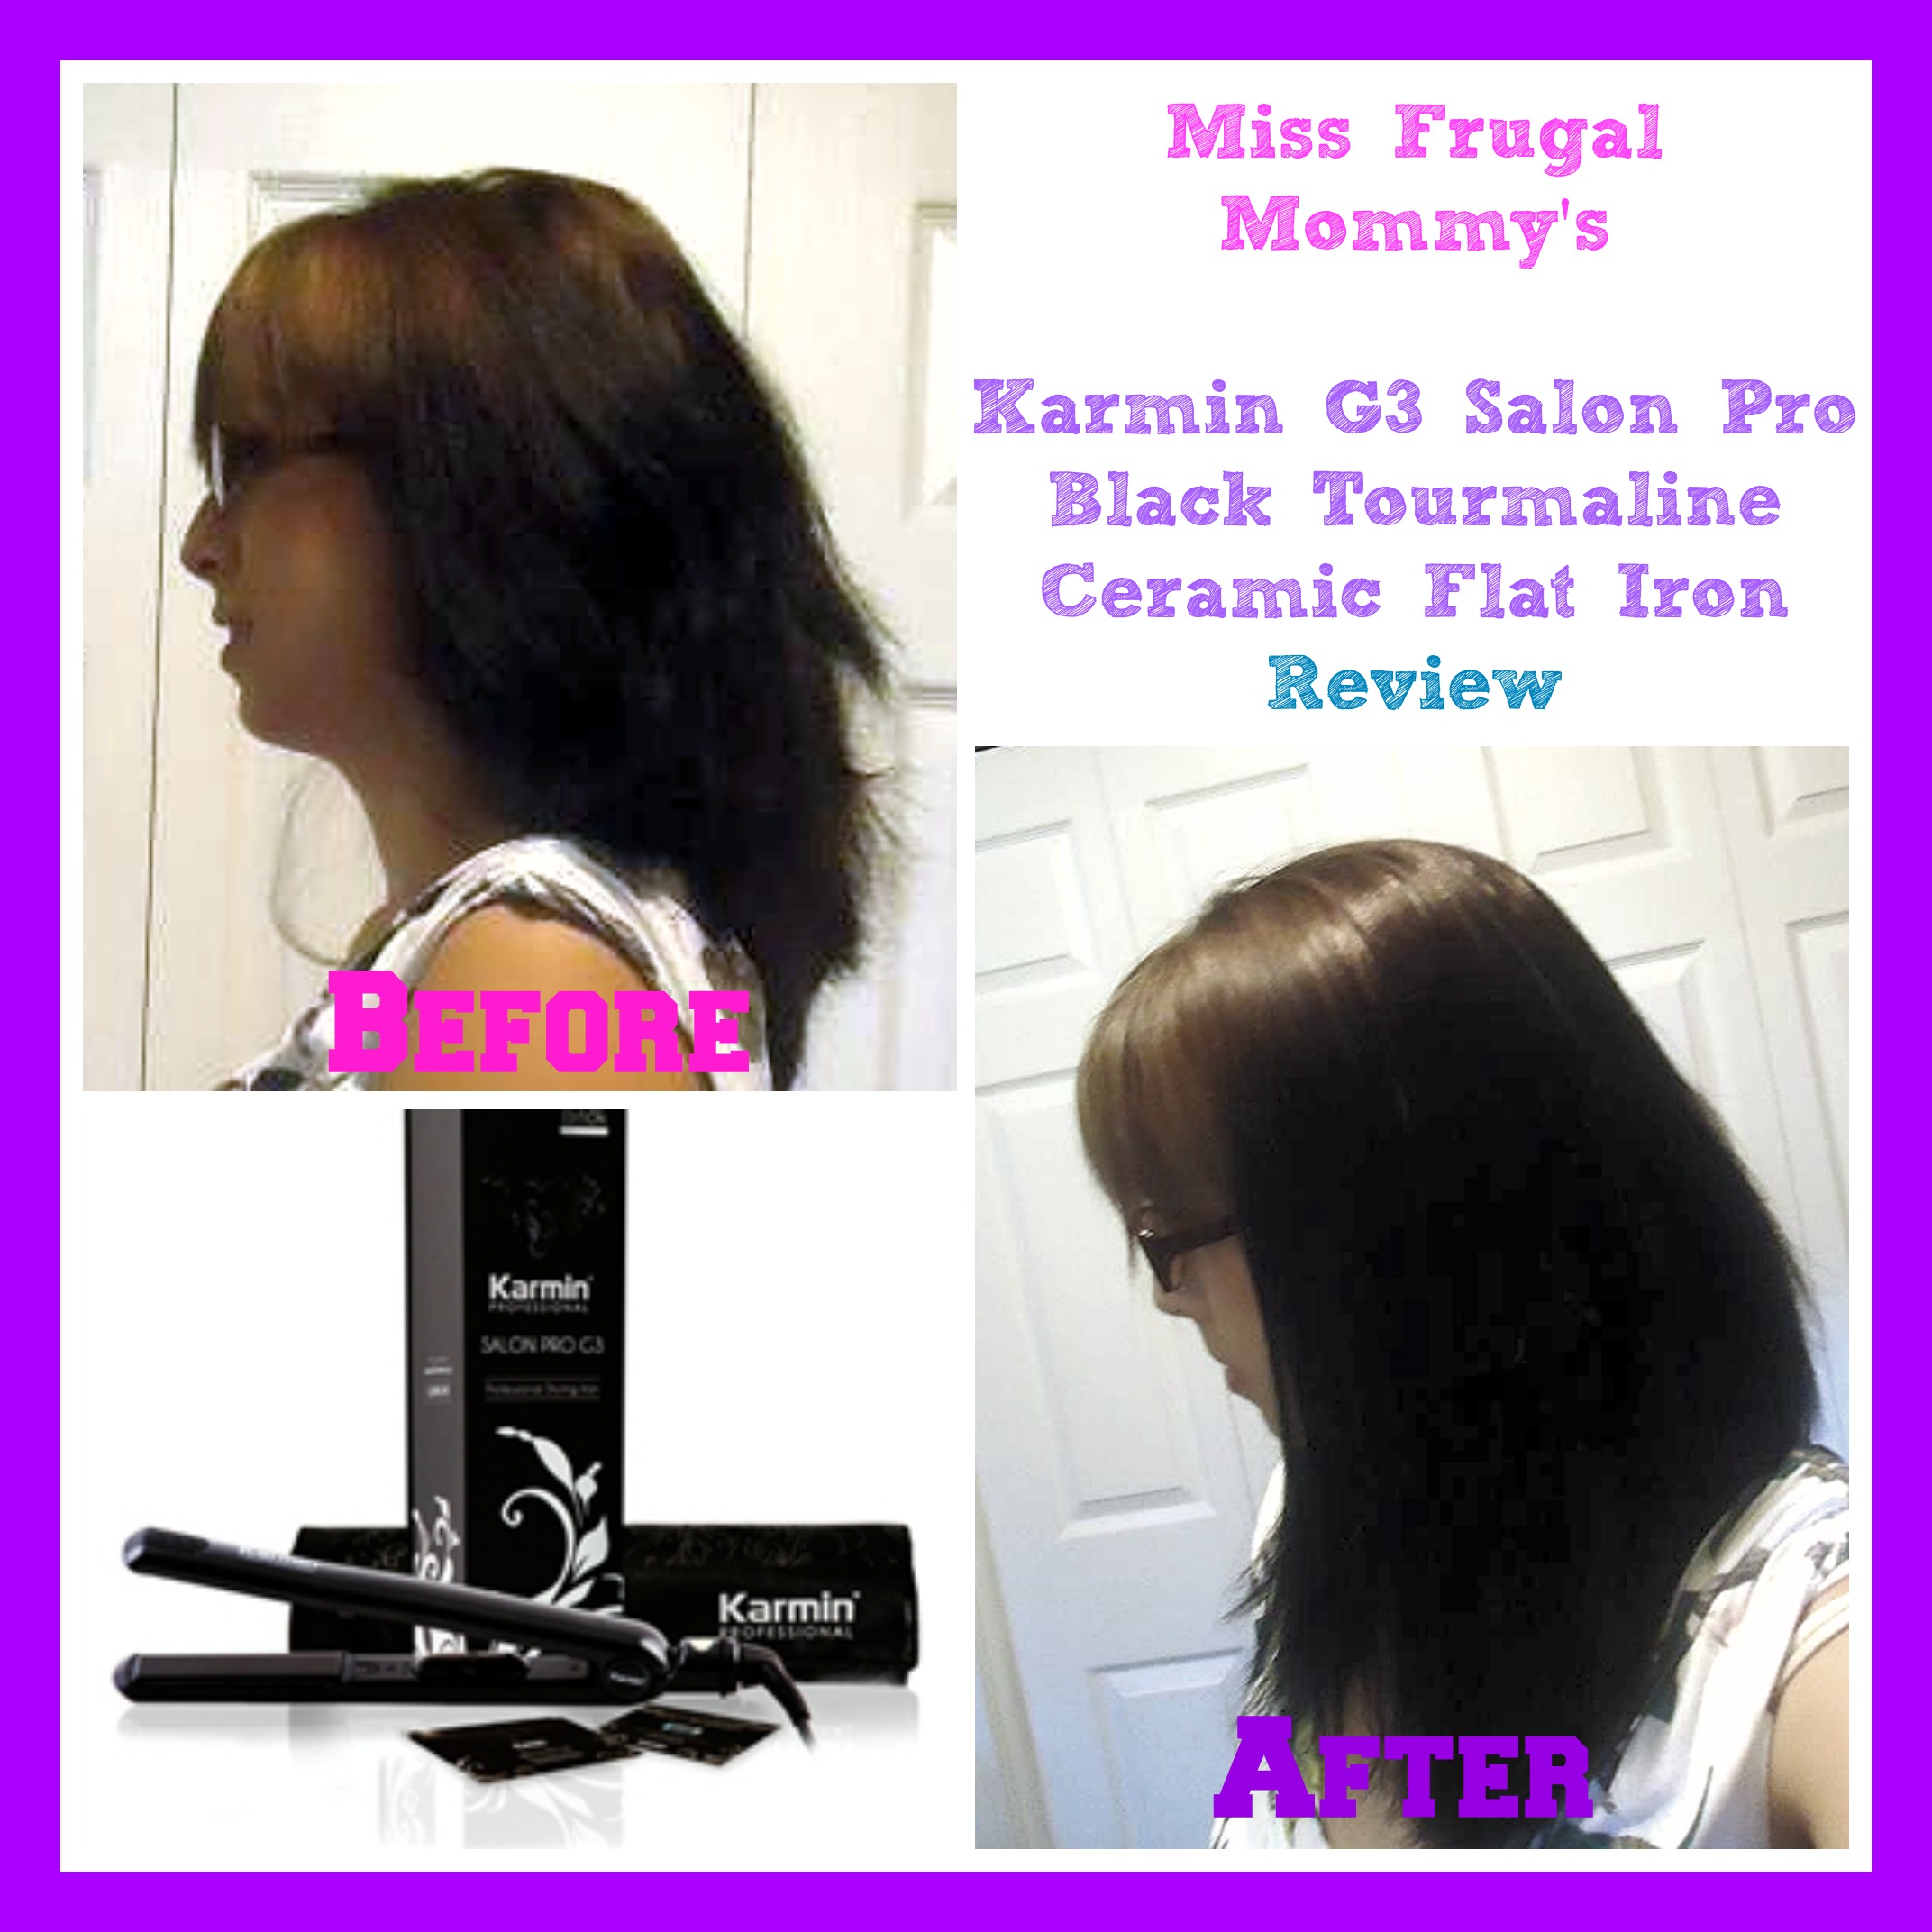 http://missfrugalmommy.com/wp-content/uploads/2013/08/hair-review-button.jpg